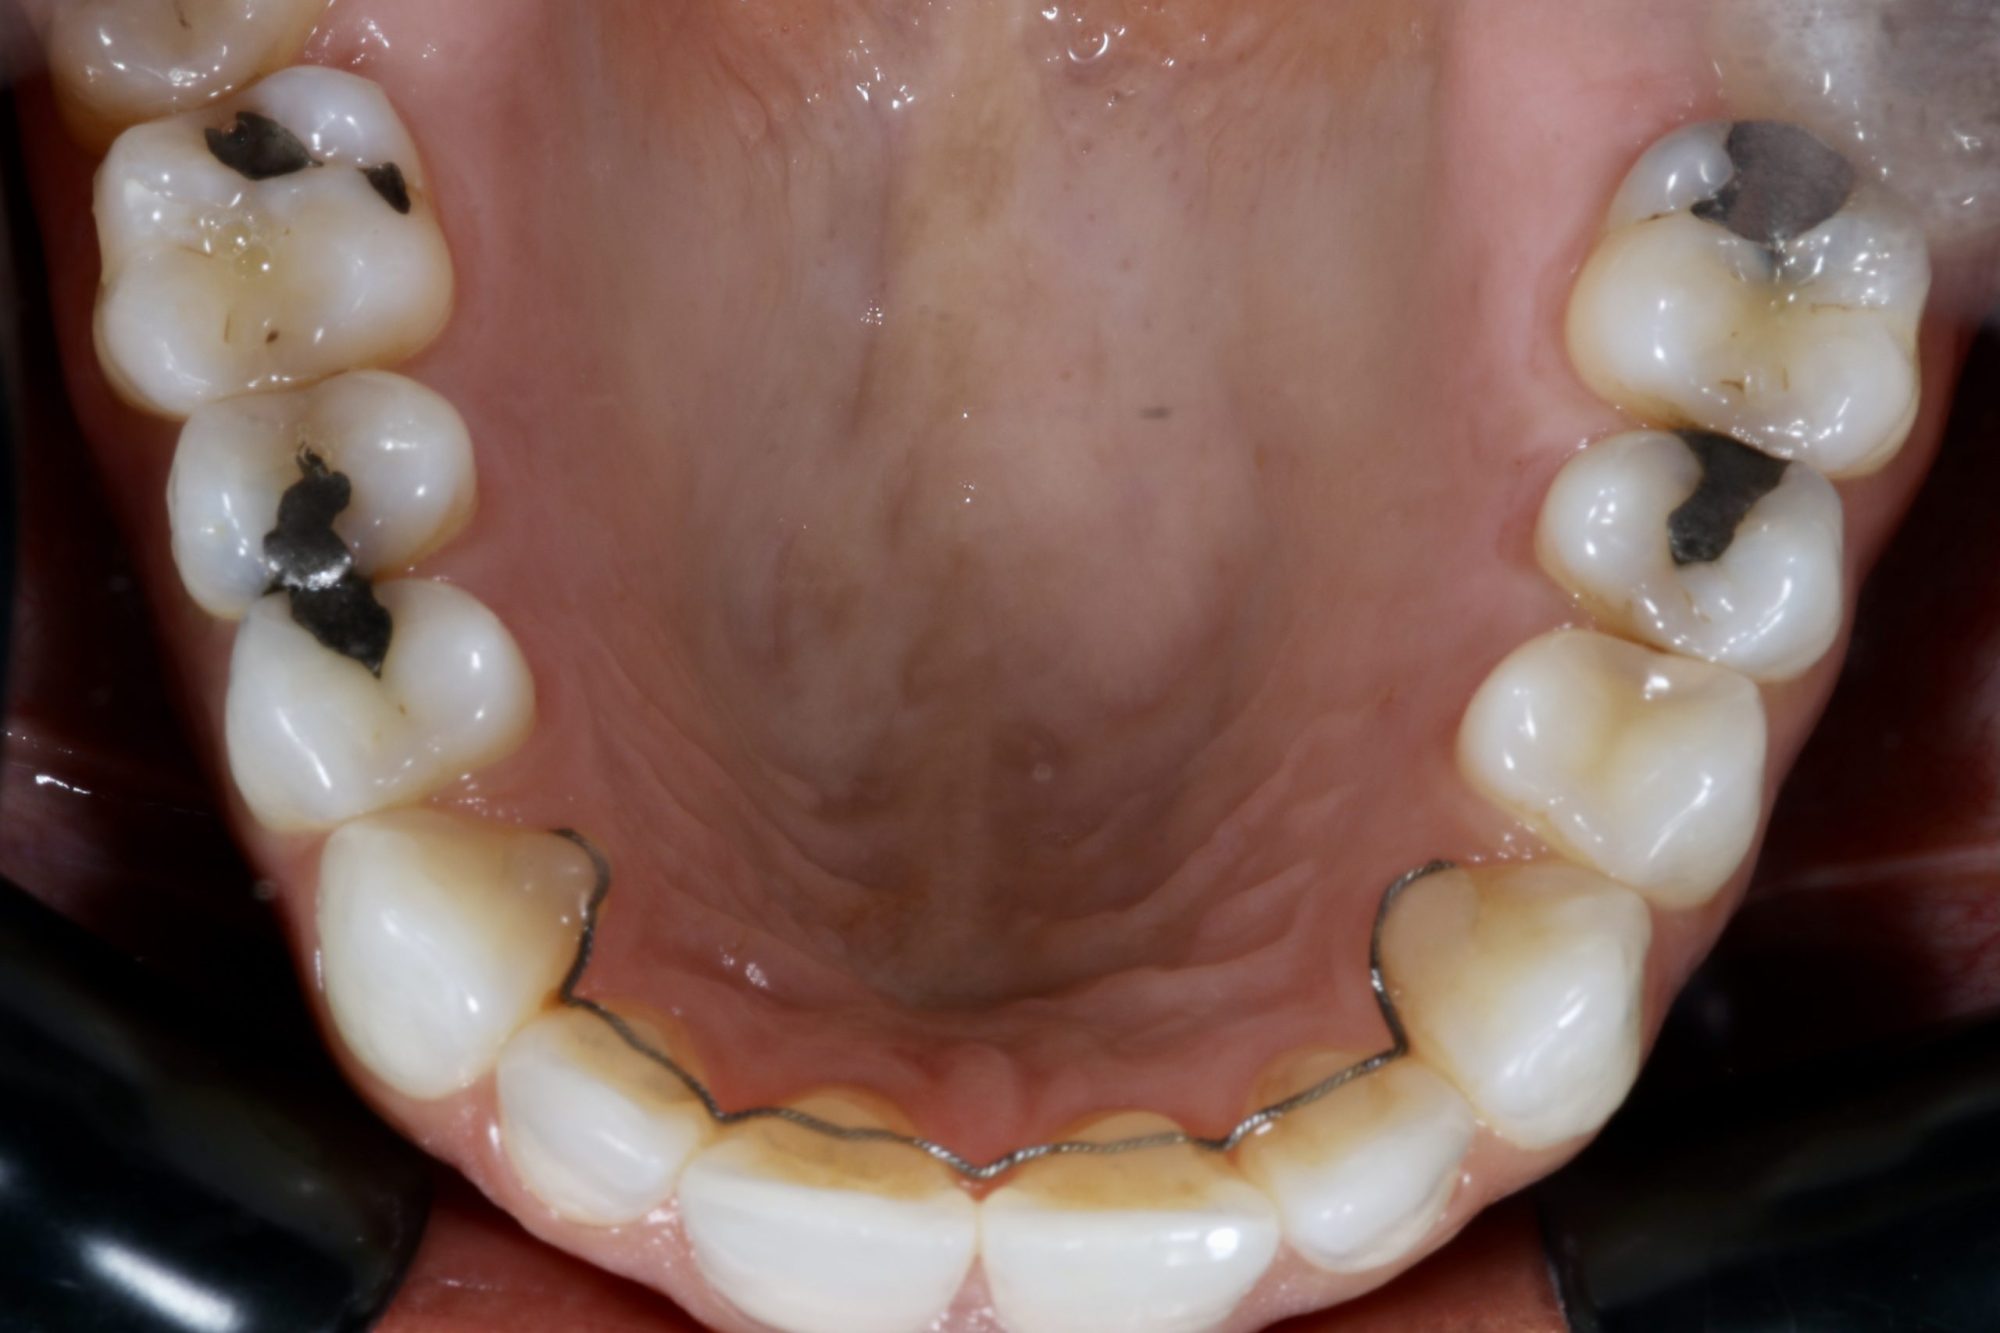 Nishan Dixit describes a minimally invasive alignment, bleaching and edge-bonding case in which the patient was ‘elated and confident’ after their smile transformation.